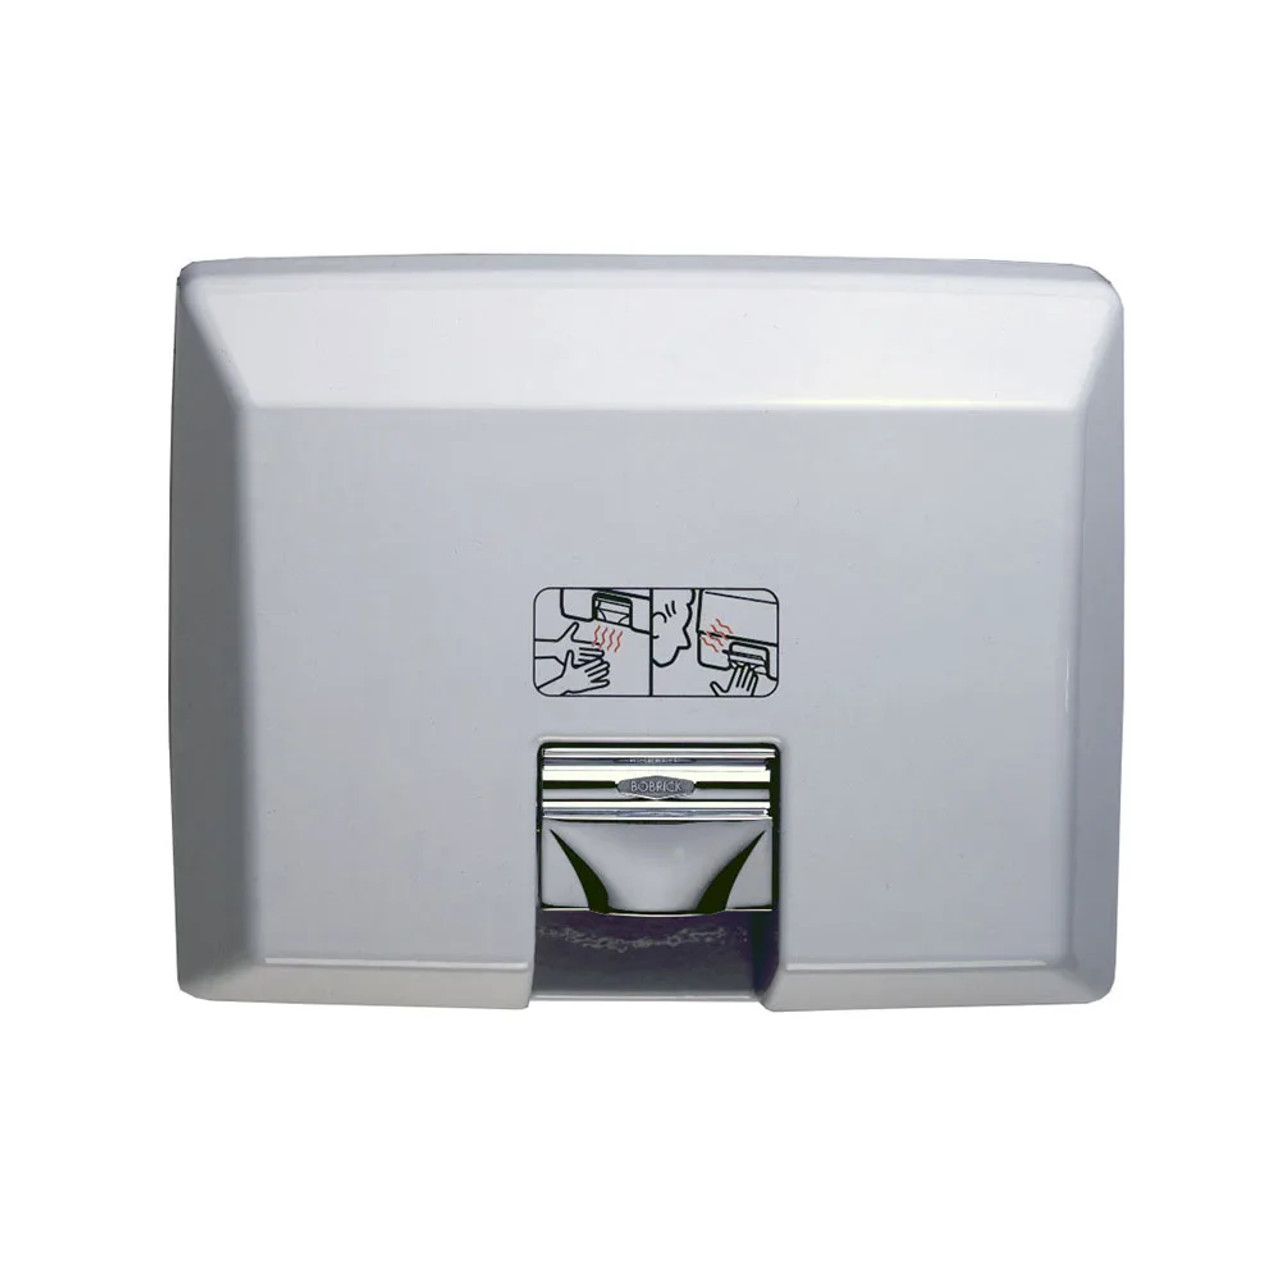 Bobrick Automatic Recessed Hand Dryer - 80 Second Dry Time, White, 115V - Chicken Pieces